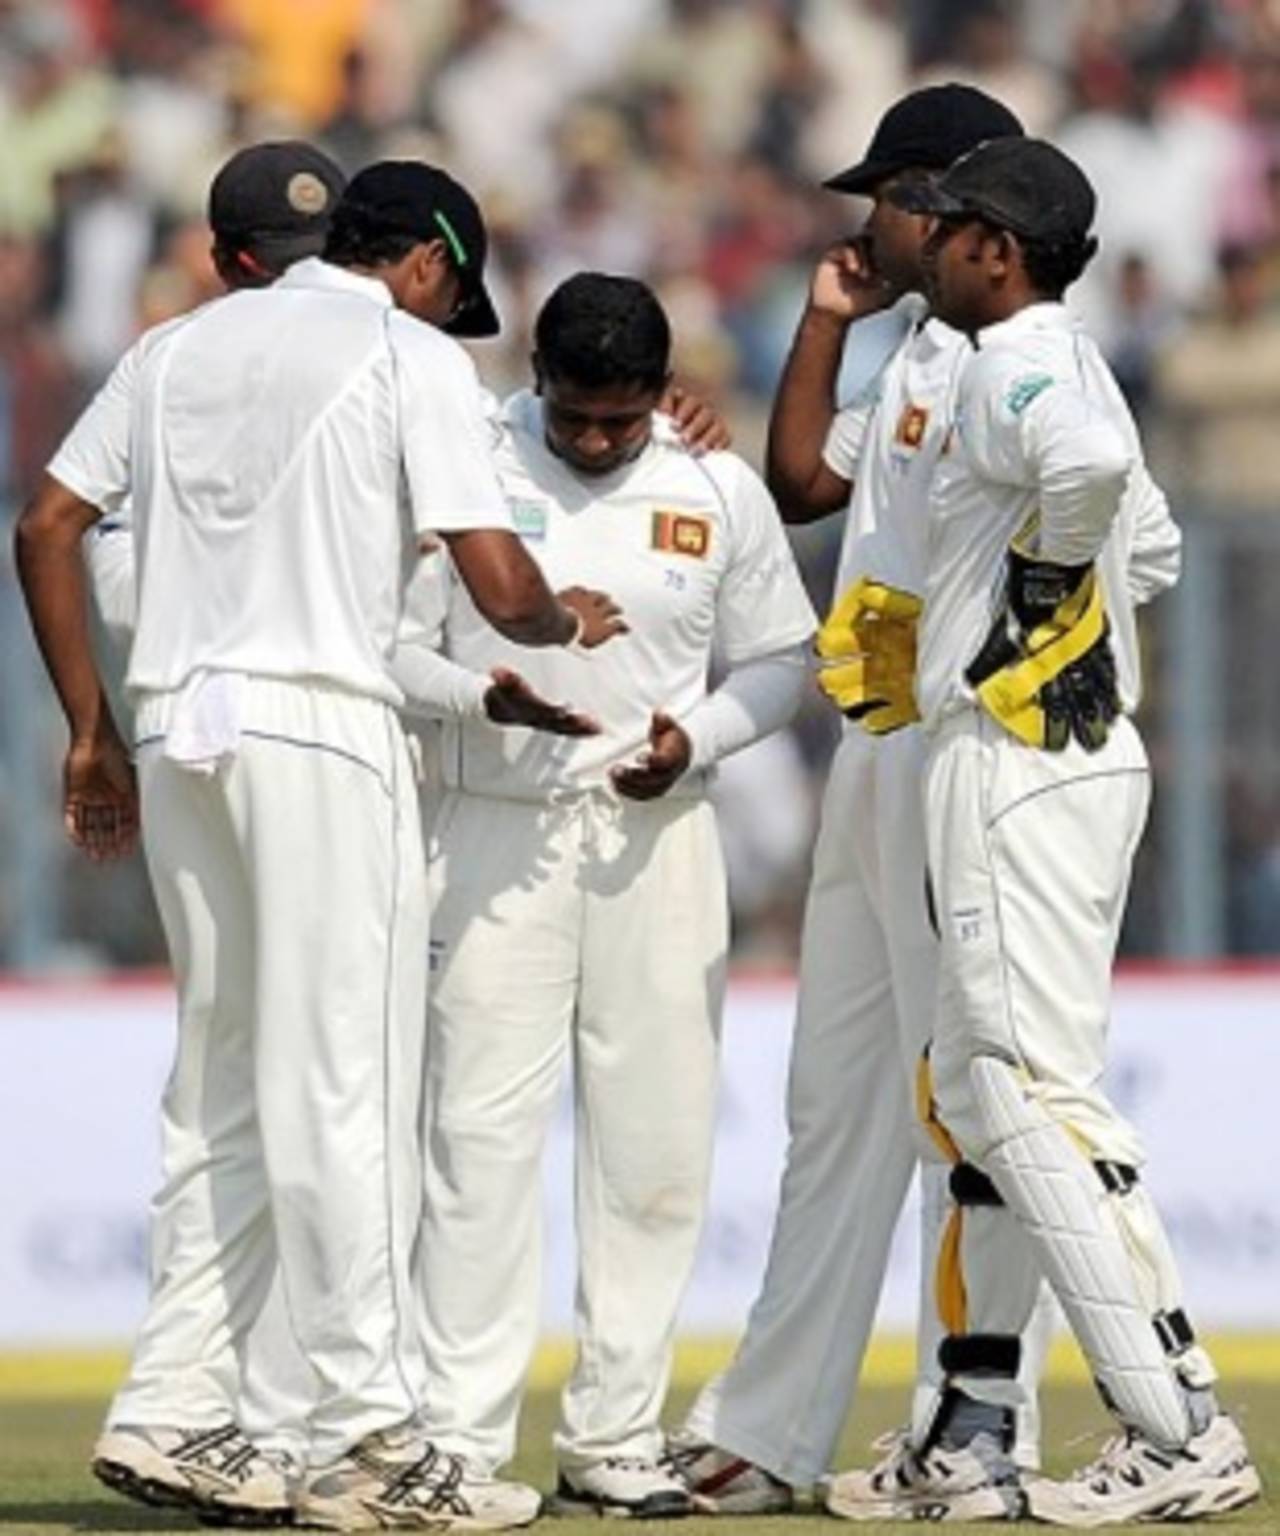 Rangana Herath is congratulated by his team-mates after Rahul Dravid's fortuitous dismissal, India v Sri Lanka, 2nd Test, Kanpur, 2nd day, November 25, 2009